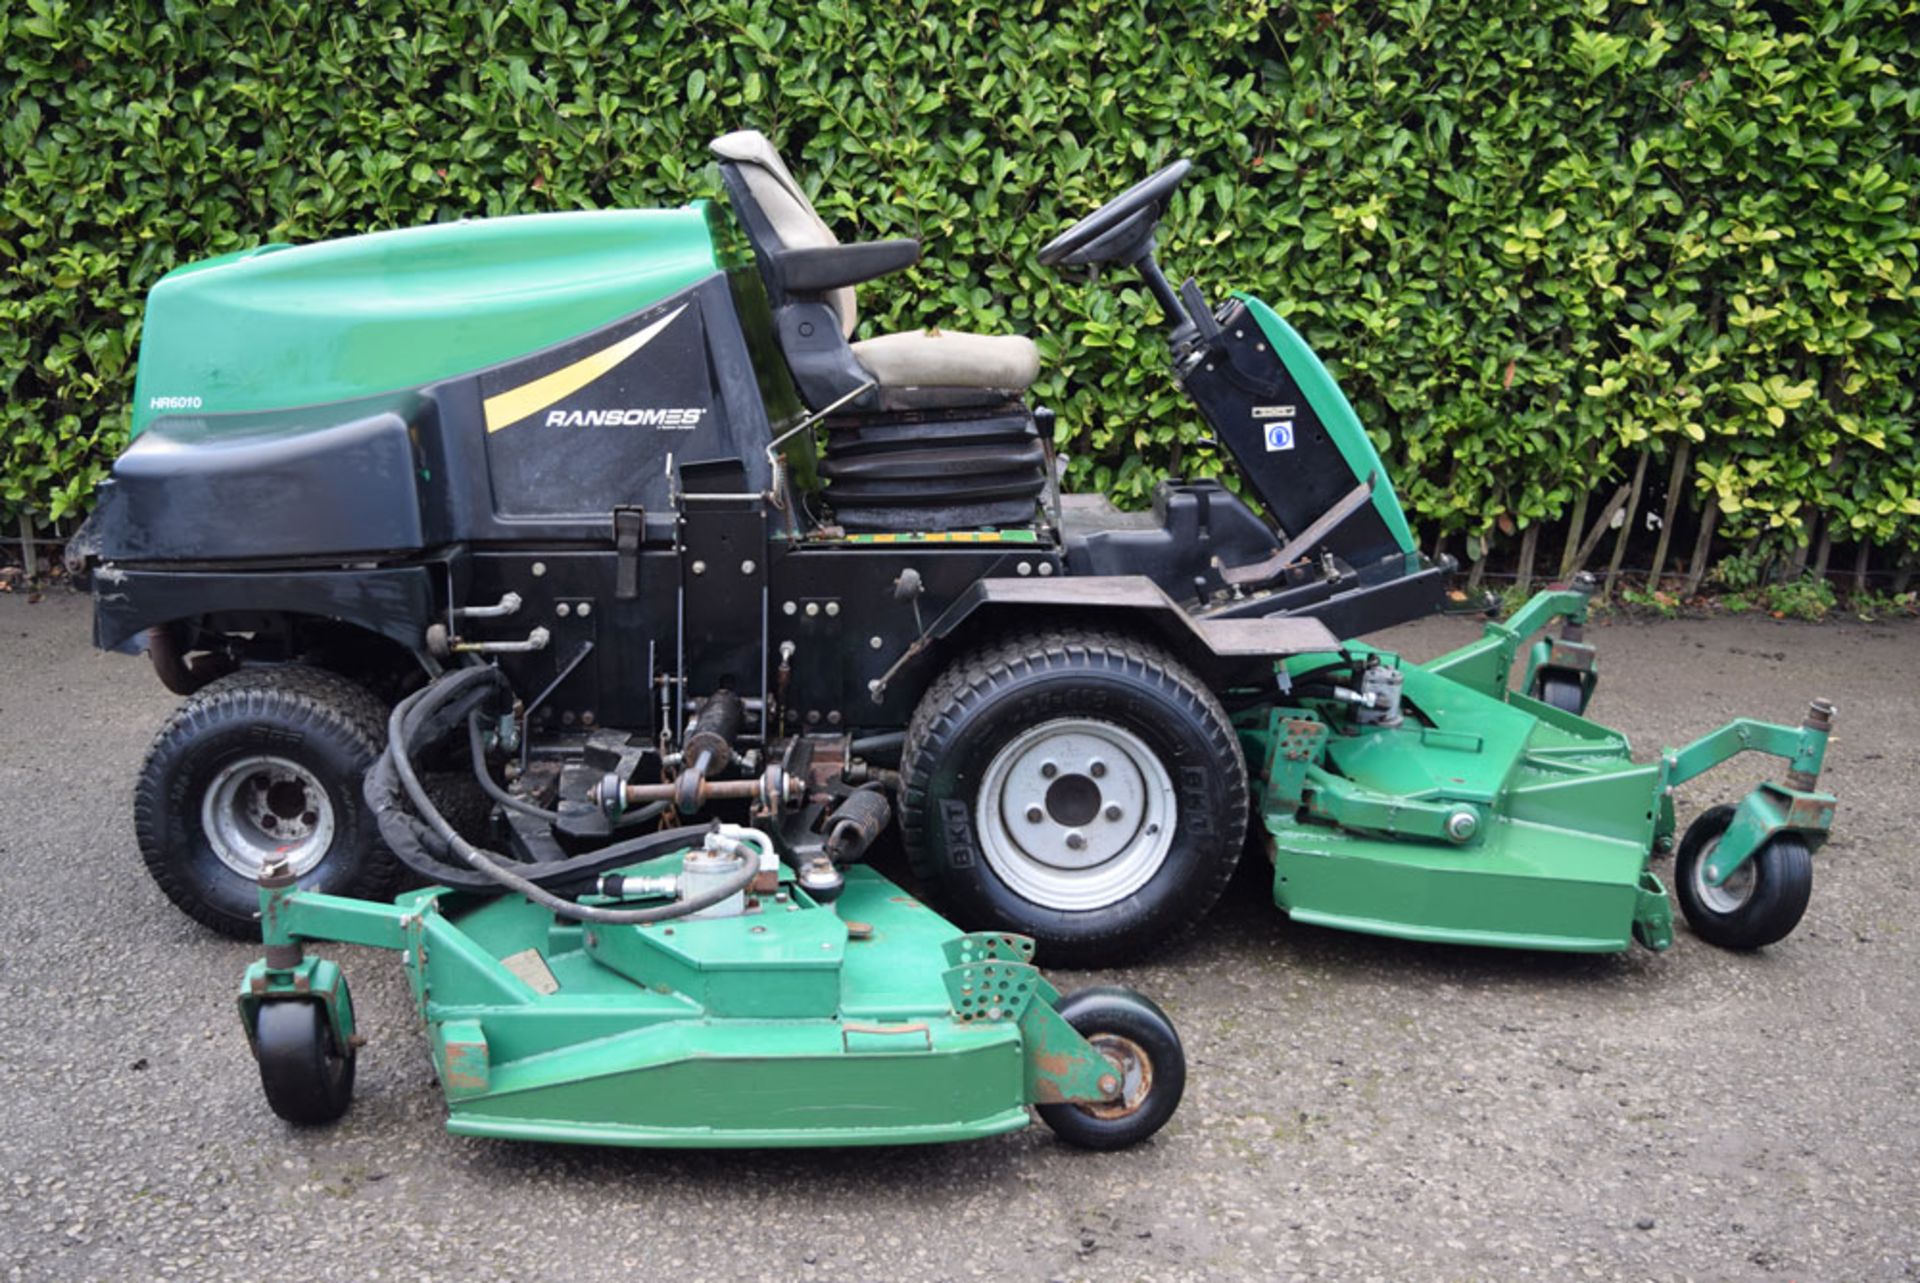 Ransomes HR6010 Wide Area Cut Ride On Rotary Mower - Image 3 of 3